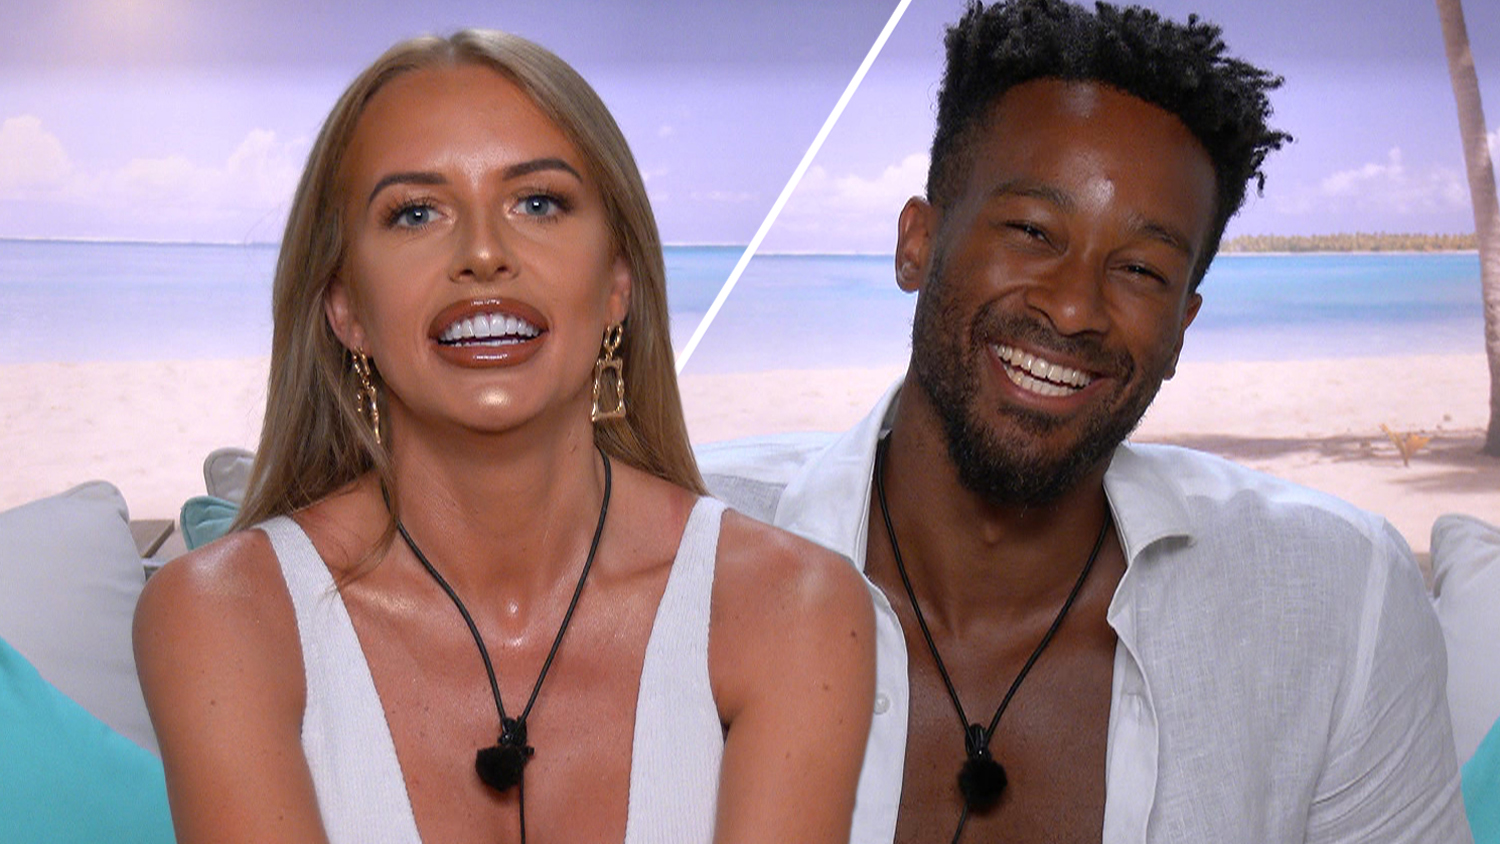 Love Island spoilers Faye Winter apologises to Teddy Soares for angry outburst